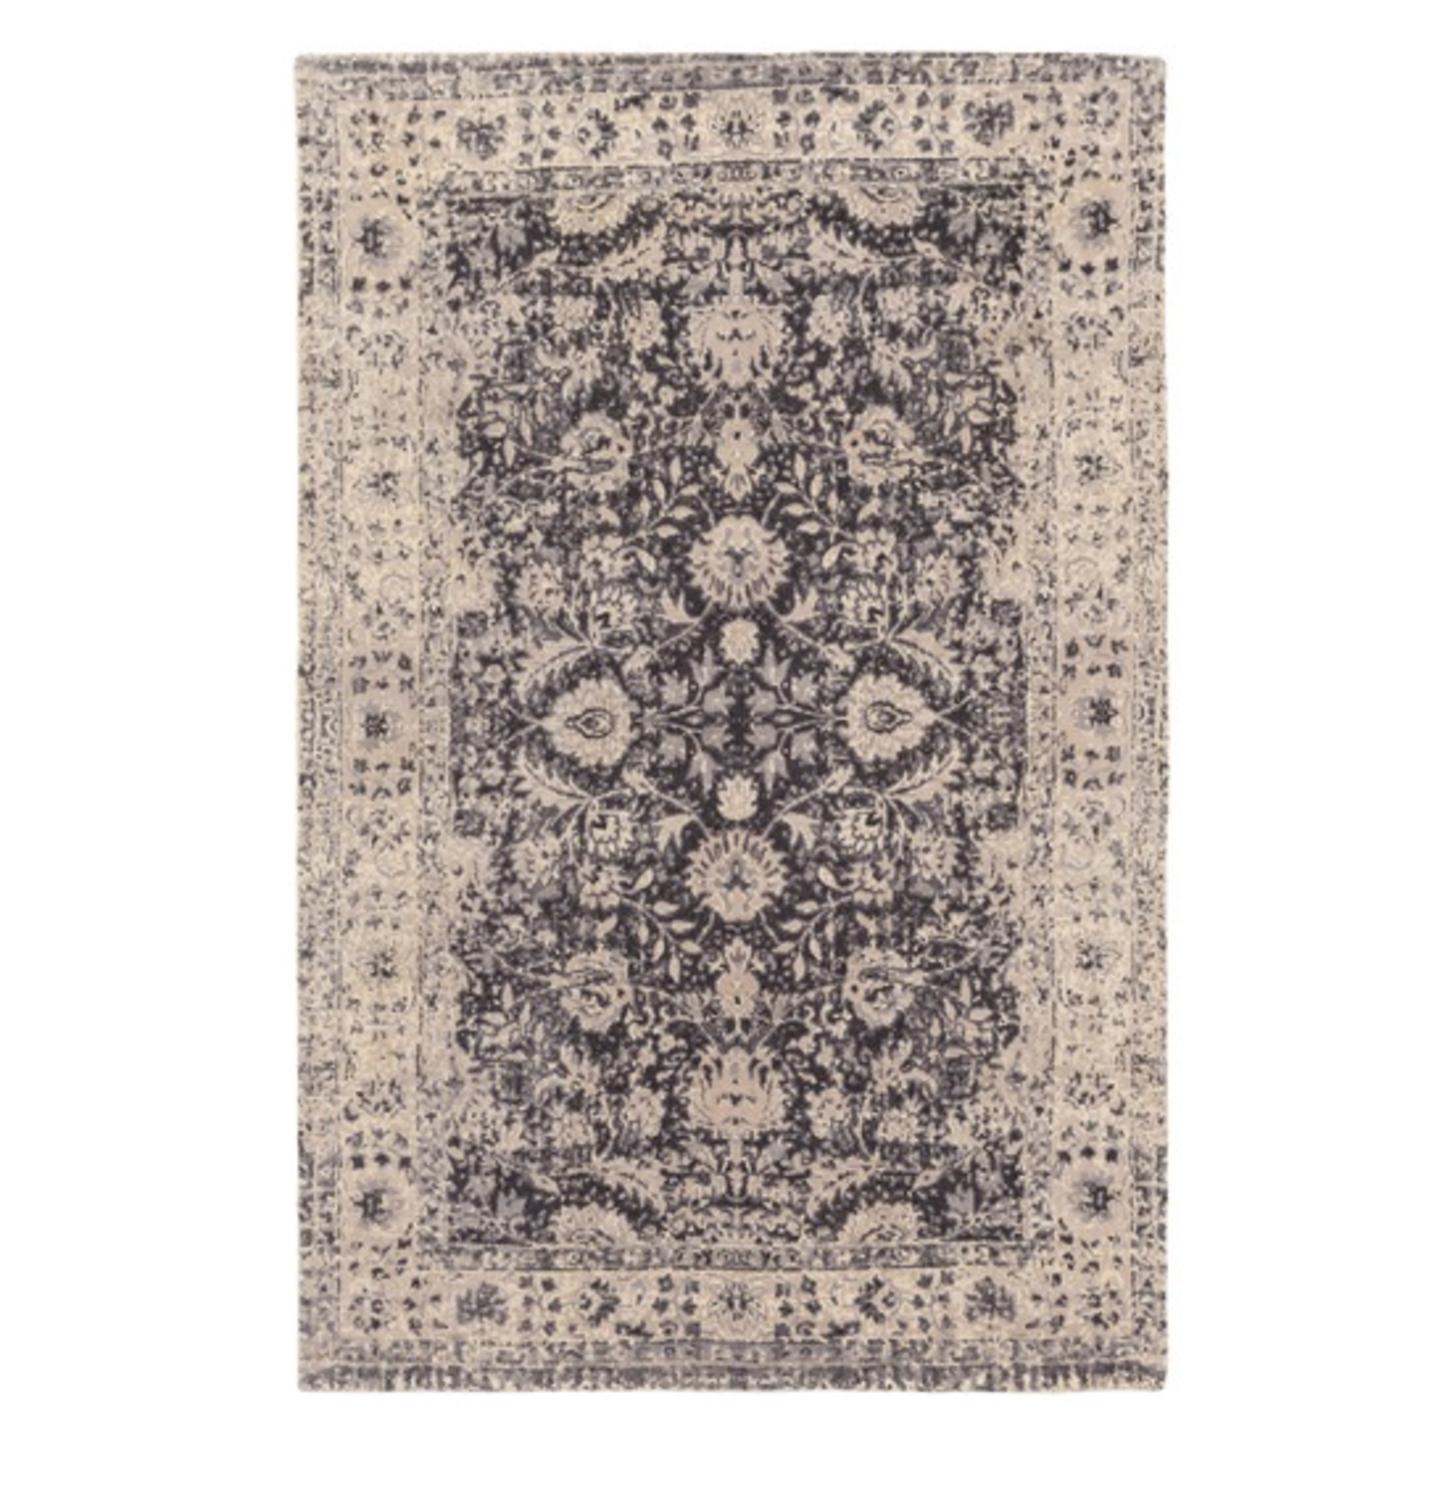 Diva At Home 5' x 7.5' Stormy Oasis Oatmeal White and Gray Hand Loomed Wool Area Throw Rug